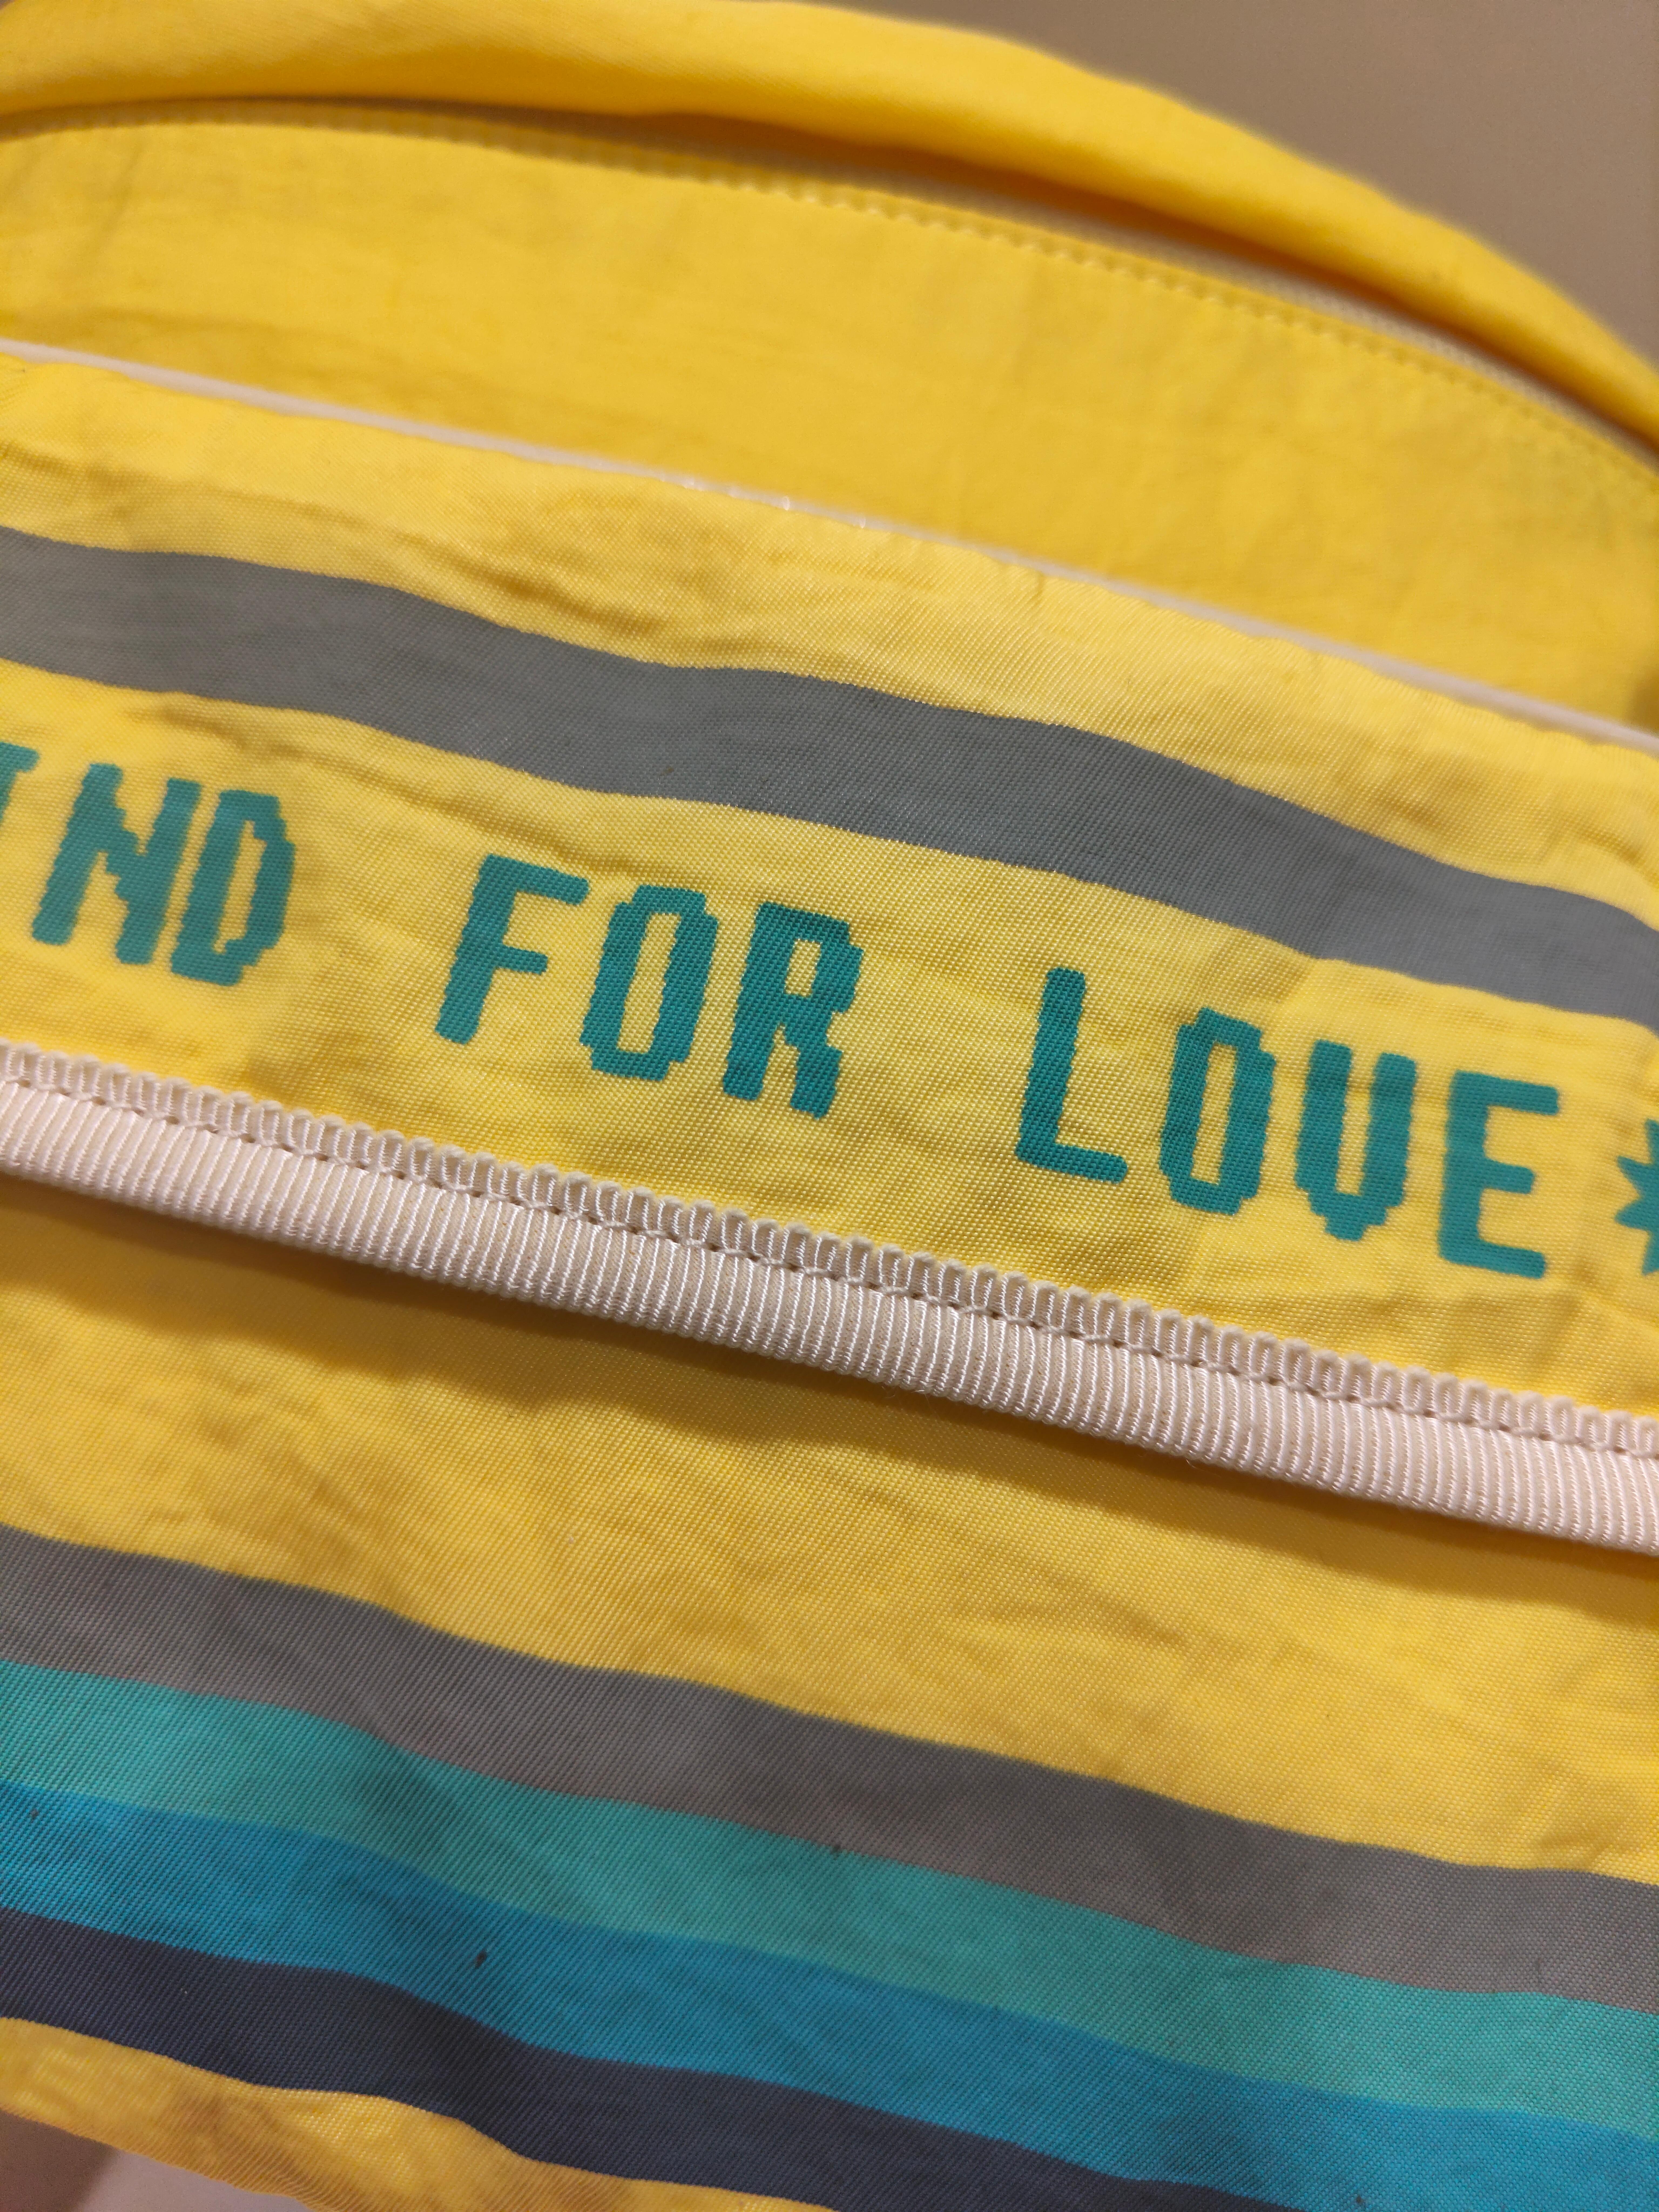 Gucci blind for love yellow Fanny pack  In Excellent Condition For Sale In Capri, IT